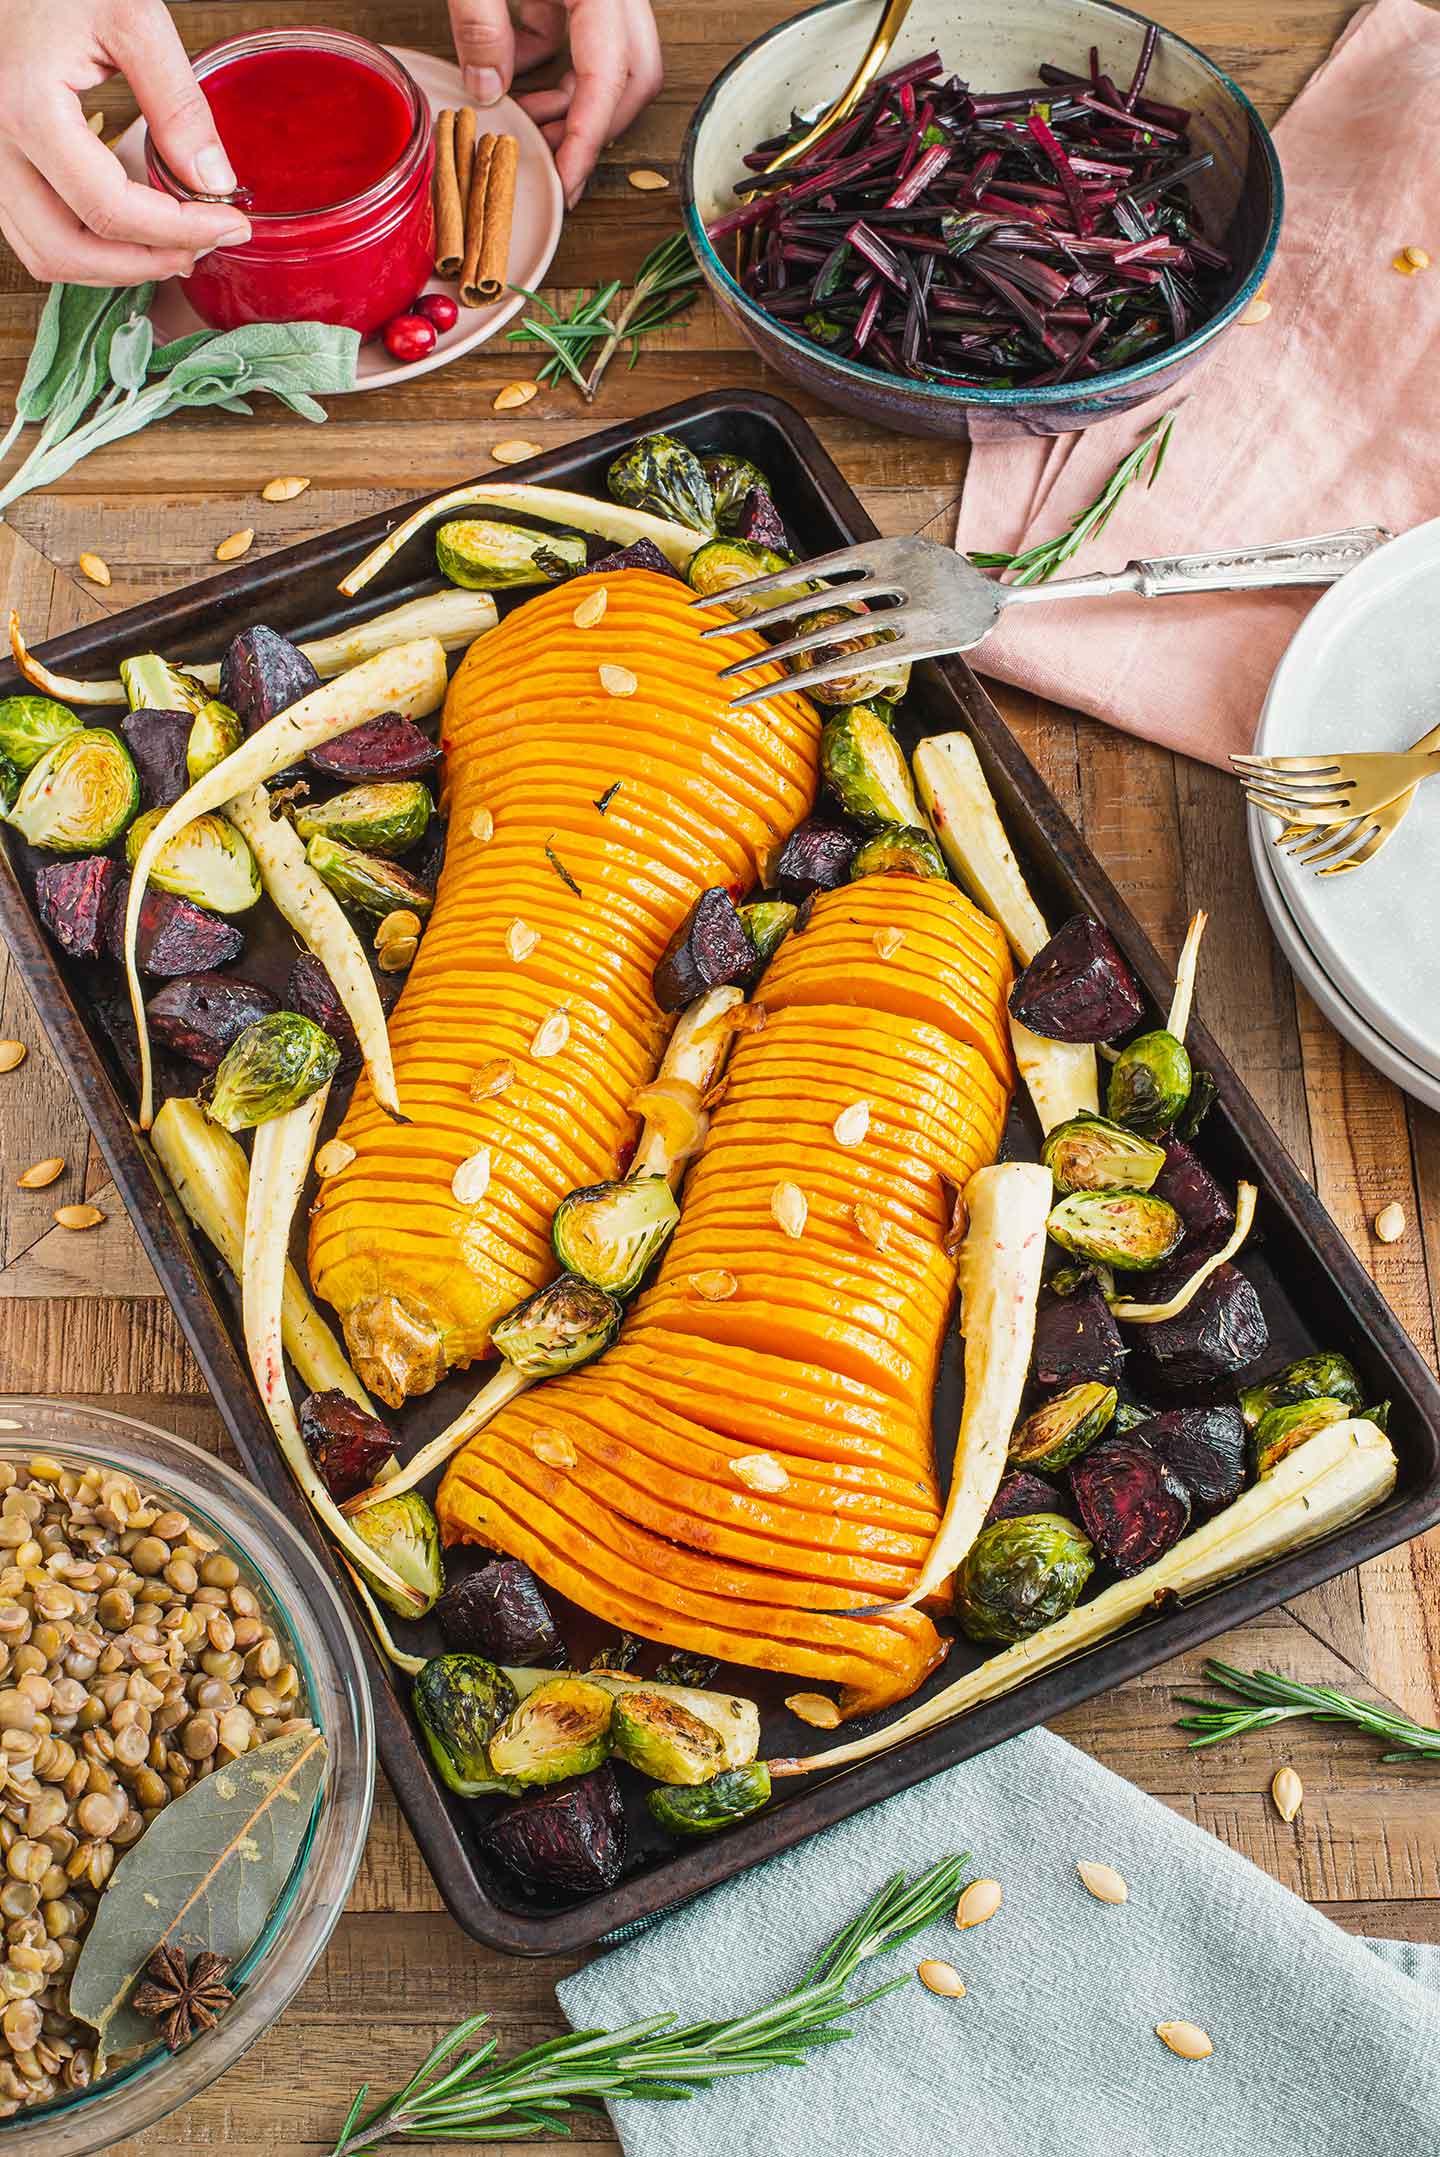 Top down view of a roasted hasselback butternut squash on a festive tray with parsnips, beets, and brussels sprouts. Lentils, sauteed beet greens, and cranberry sauce surround the tray.